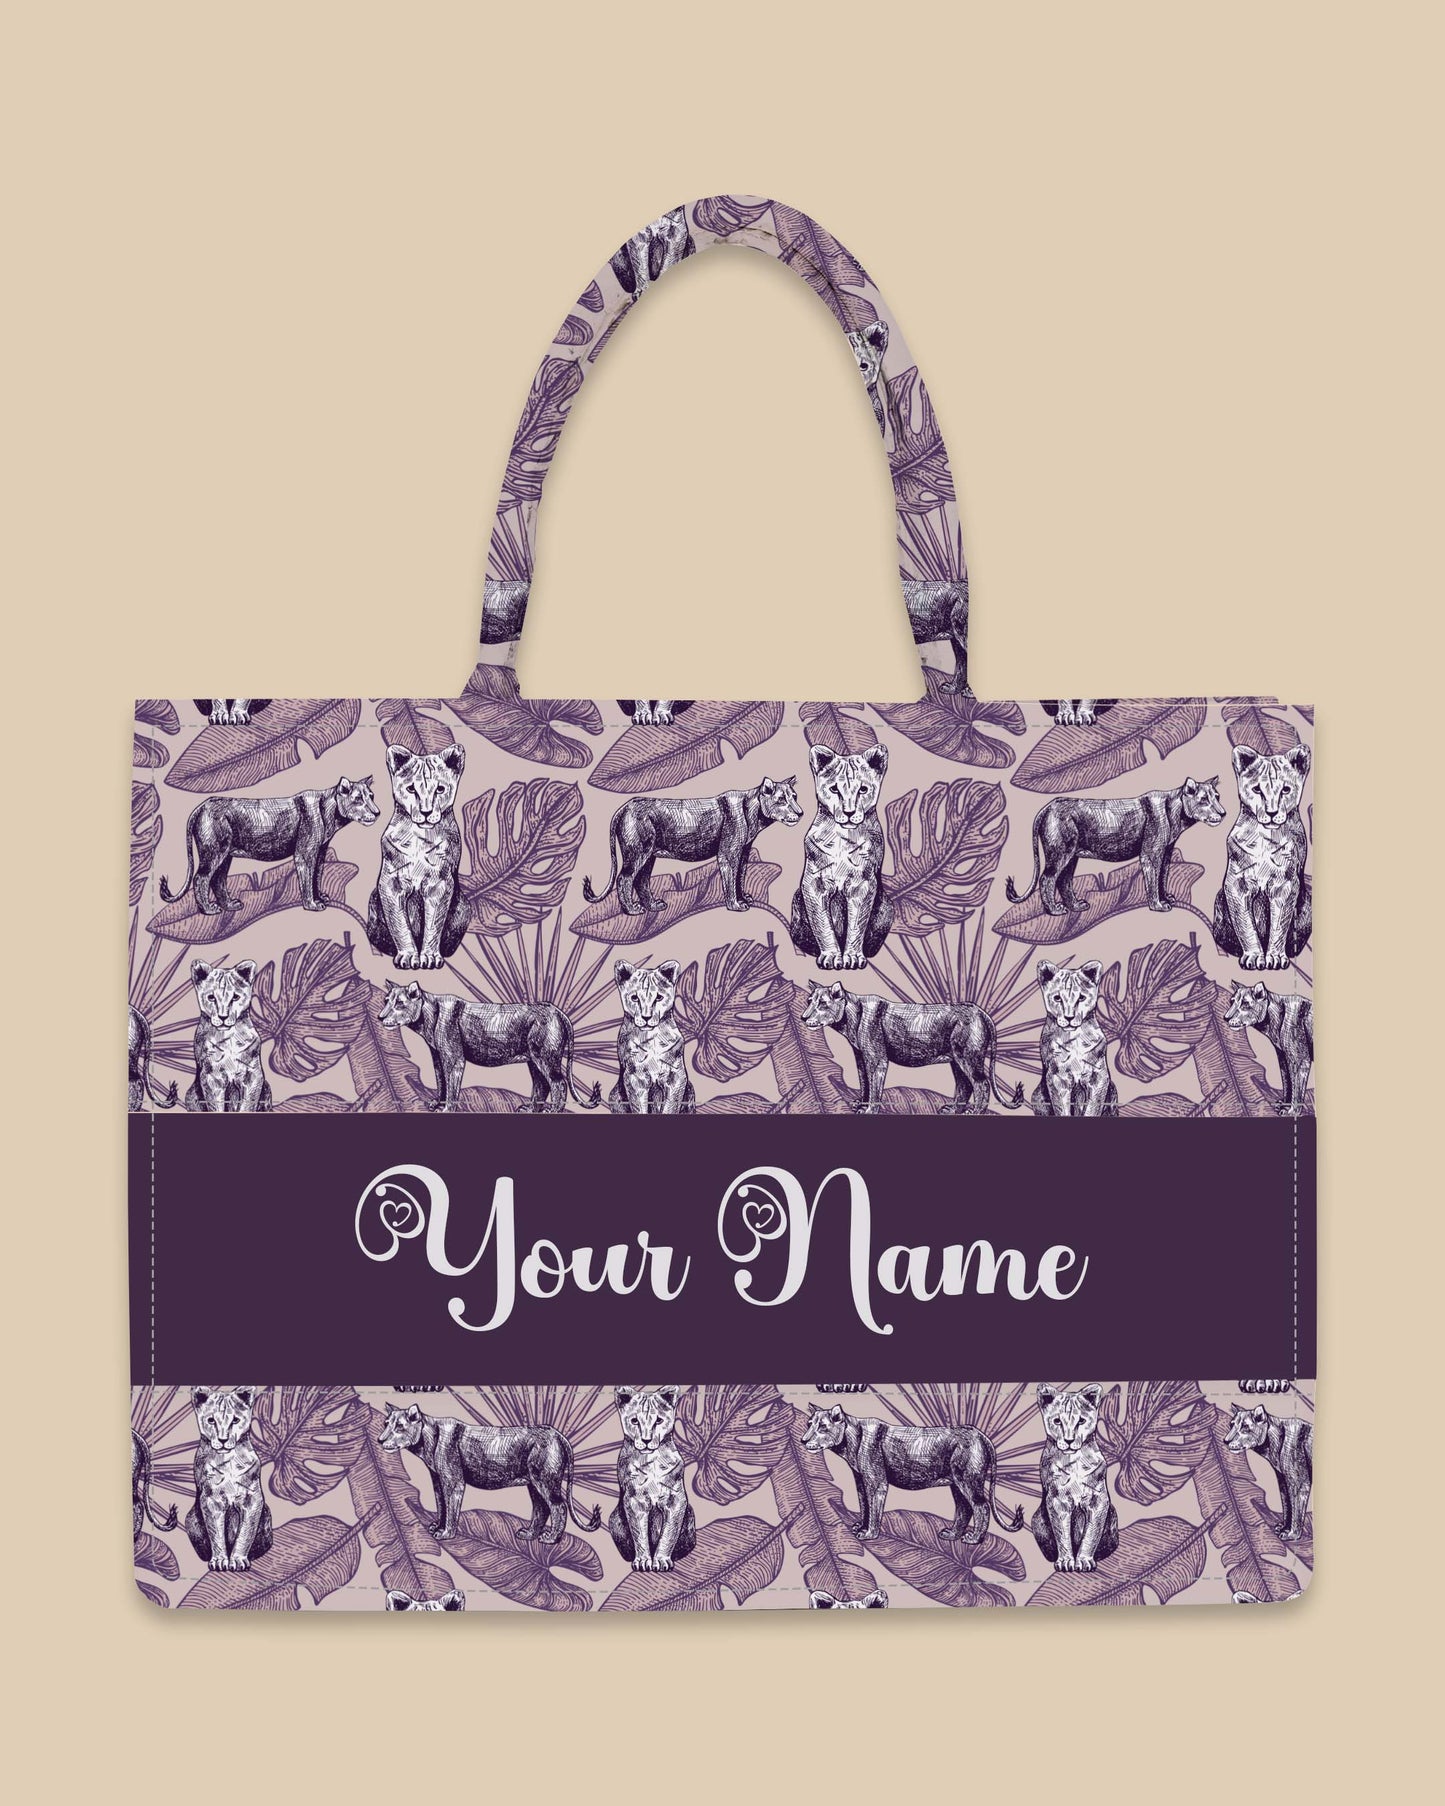 Customized Tote Bag Designed With Lion And Leaves In Engraving Style